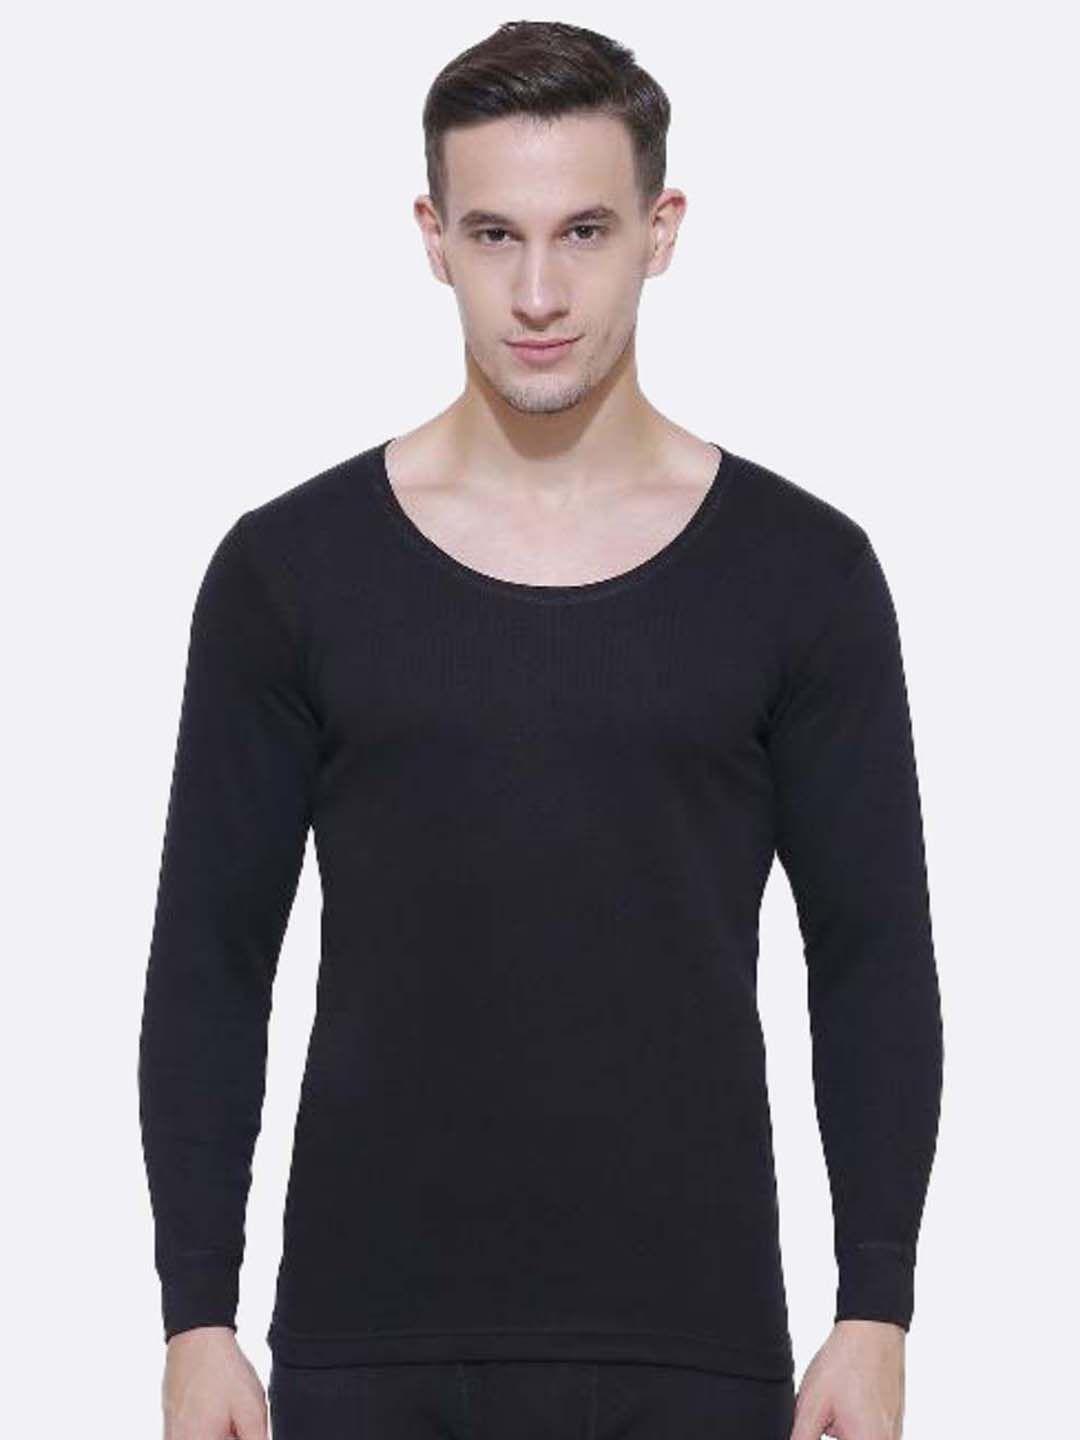 bodycare insider men solid knitted cotton thermal tops